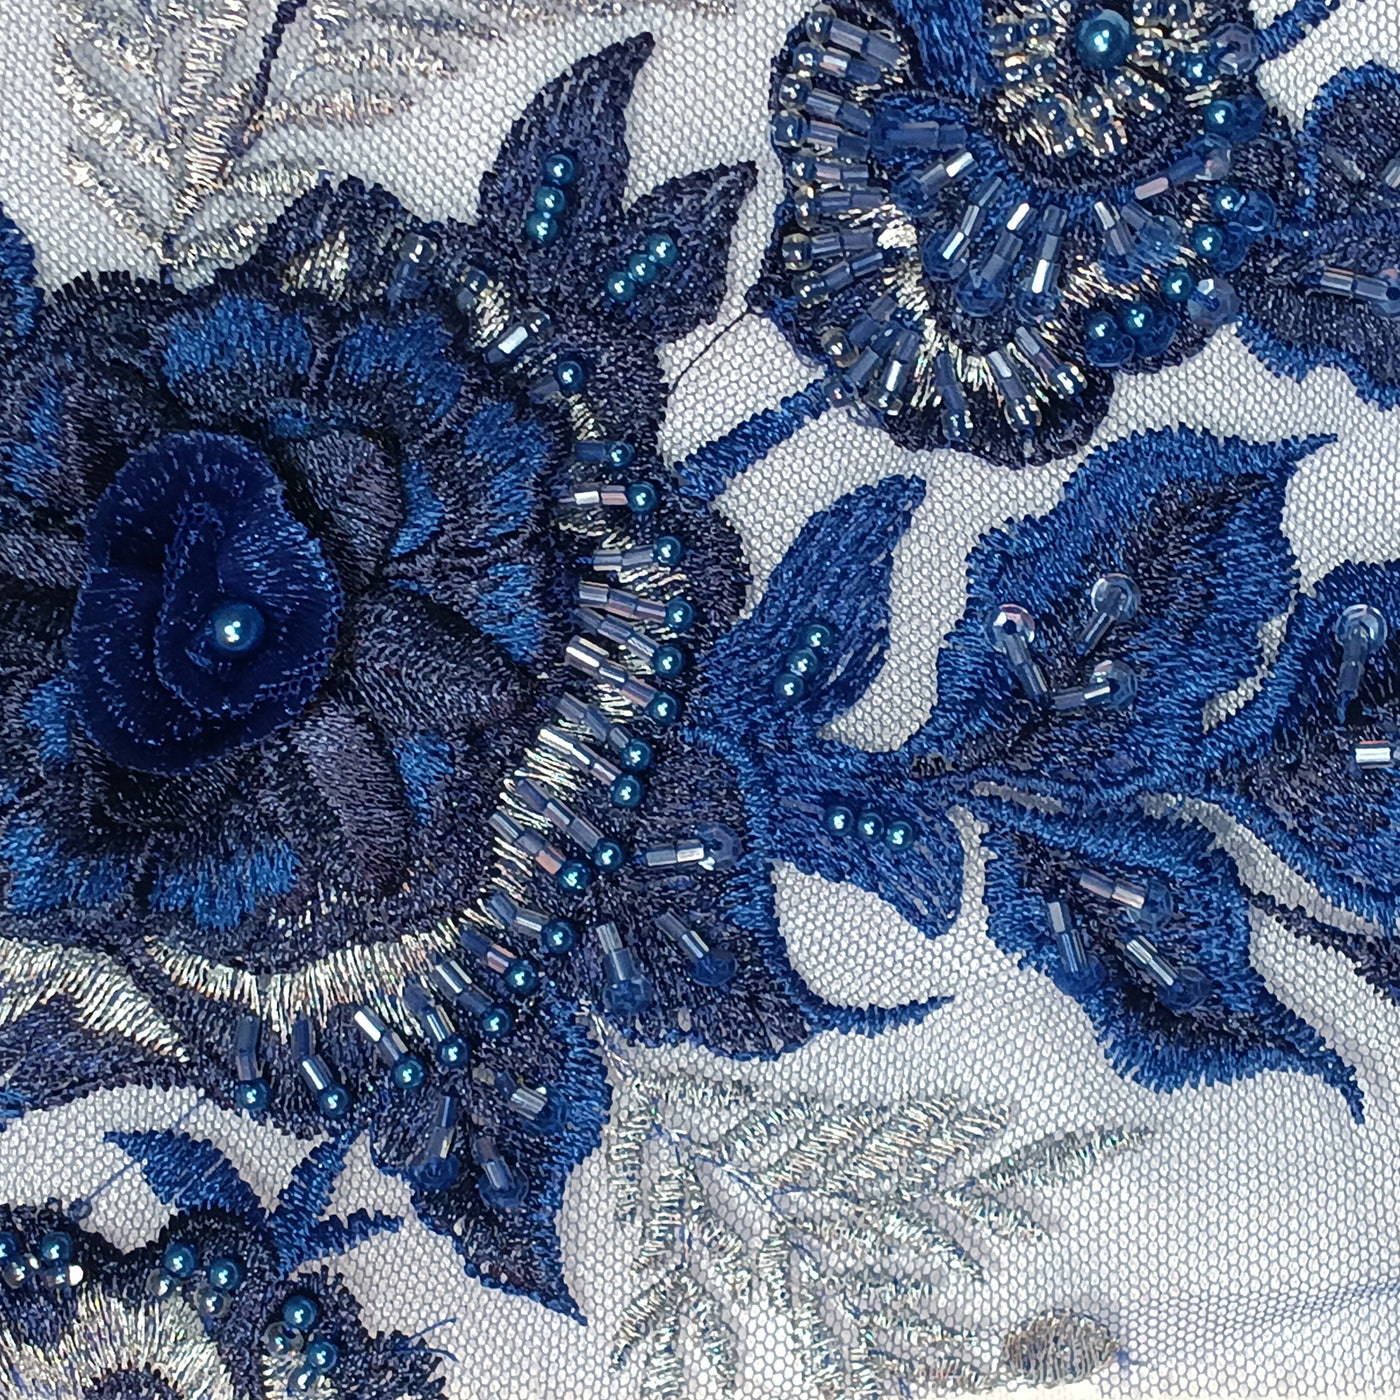 3D Floral Embroidered & Beaded Net Fabric with Beads. Lace USA